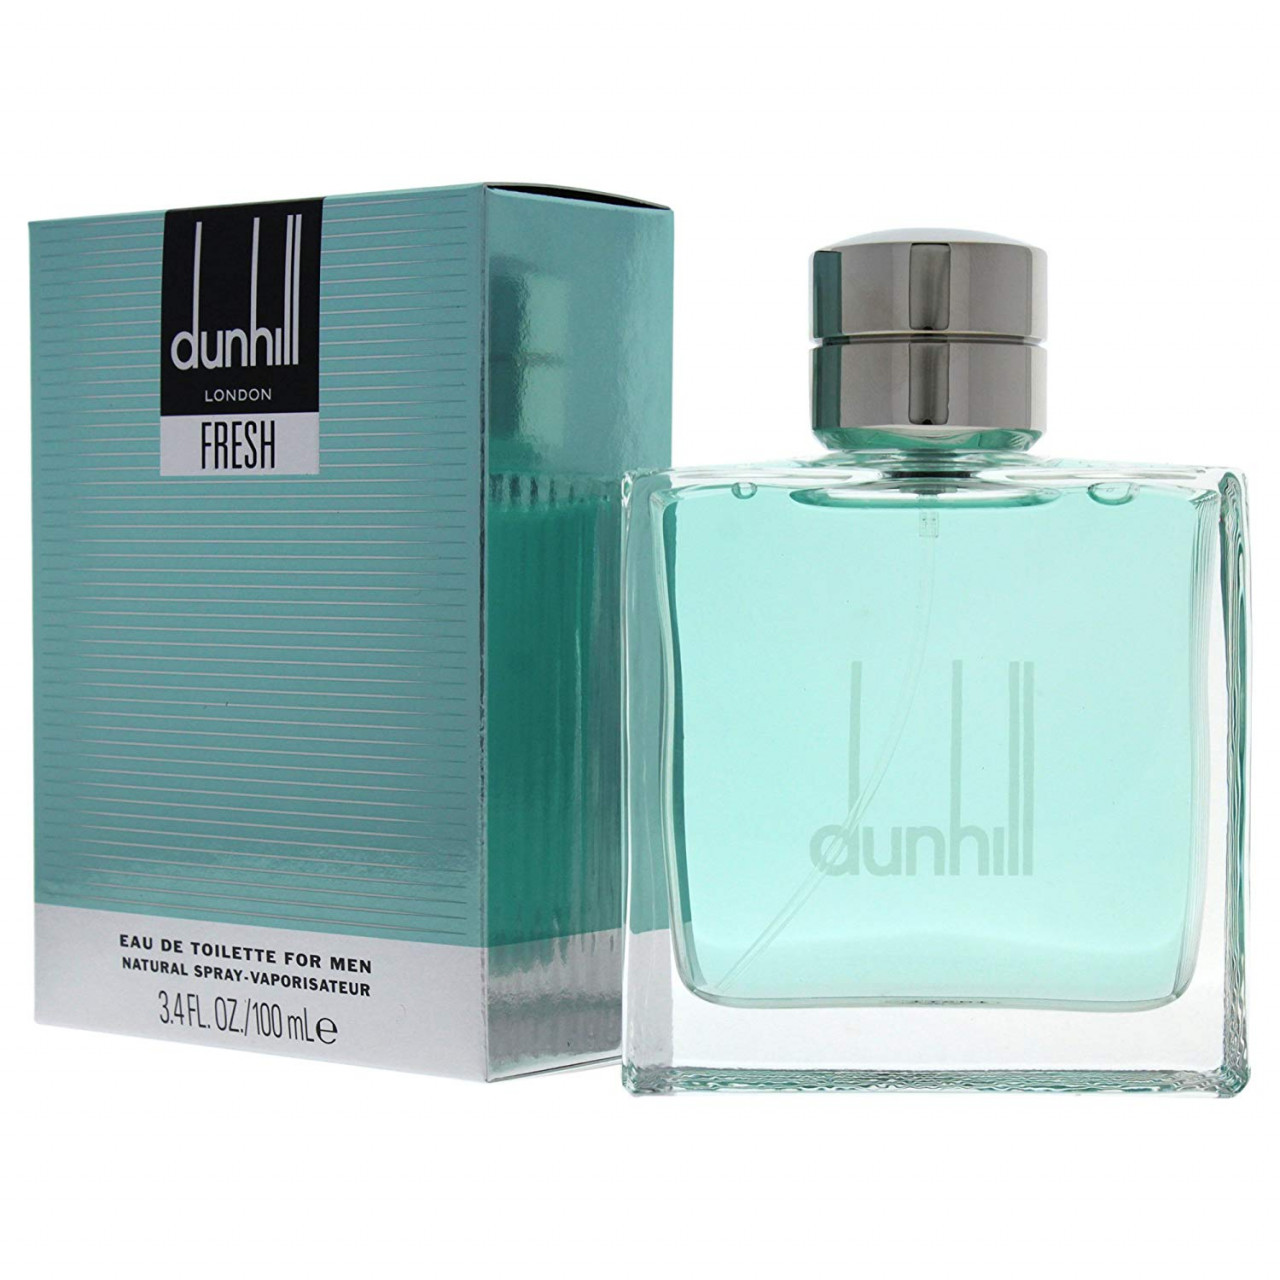 Dunhill Fresh by Dunhill Perfume For Men Price in Pakistan